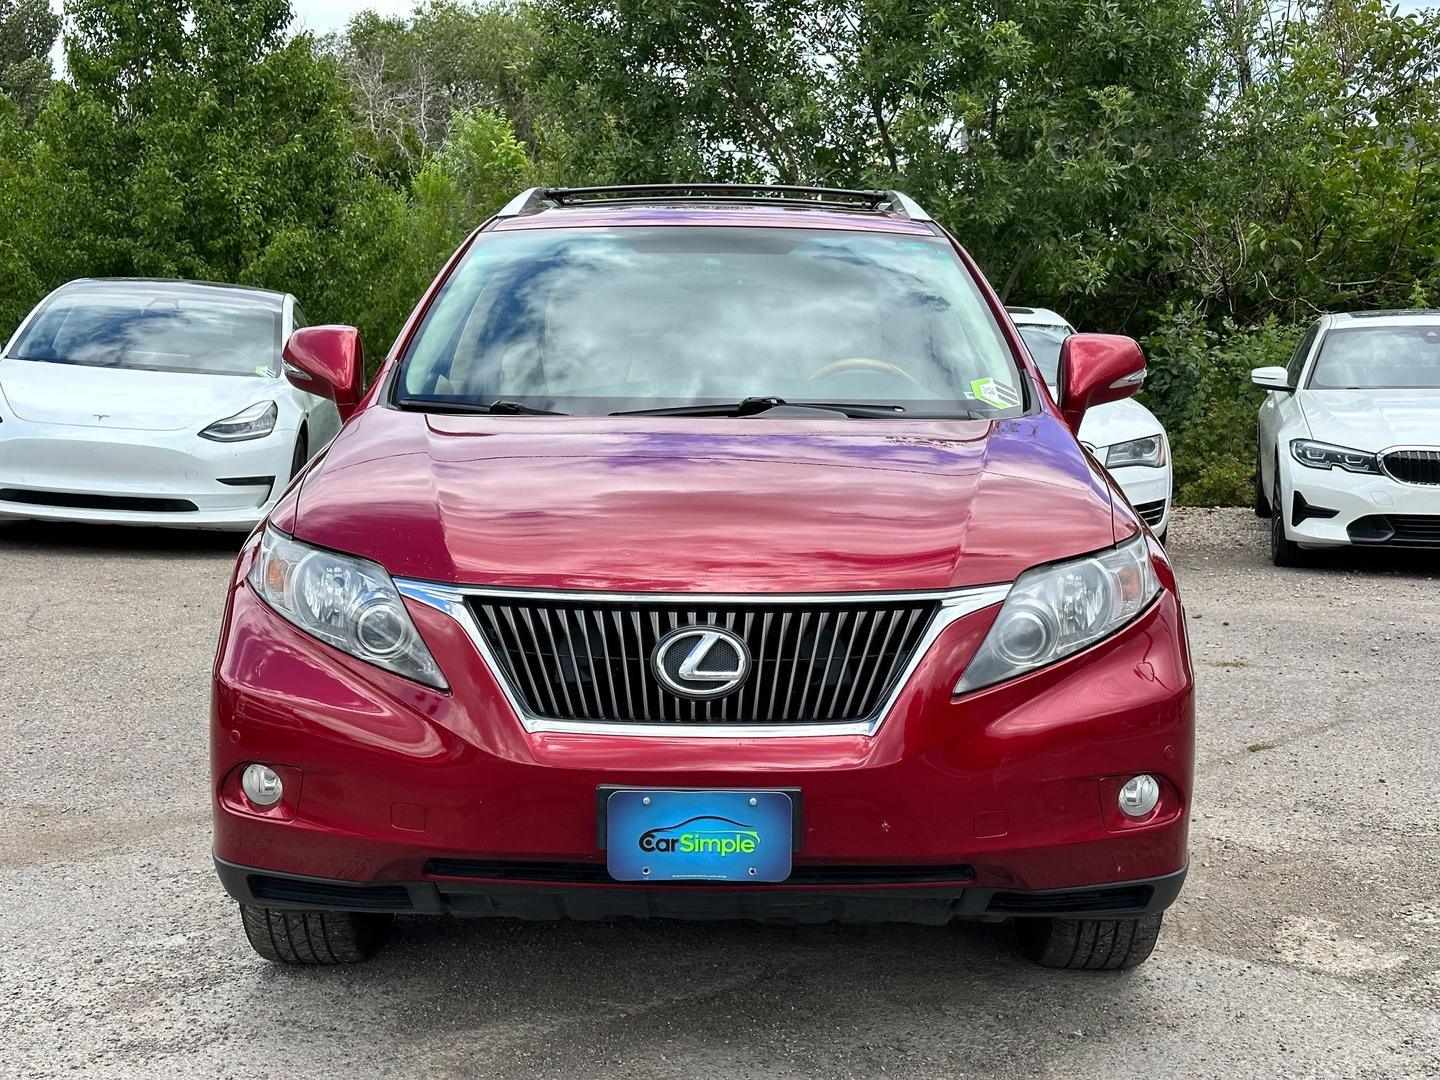 Used 2011 Lexus RX 350 with VIN 2T2BK1BA4BC096234 for sale in Springville, UT